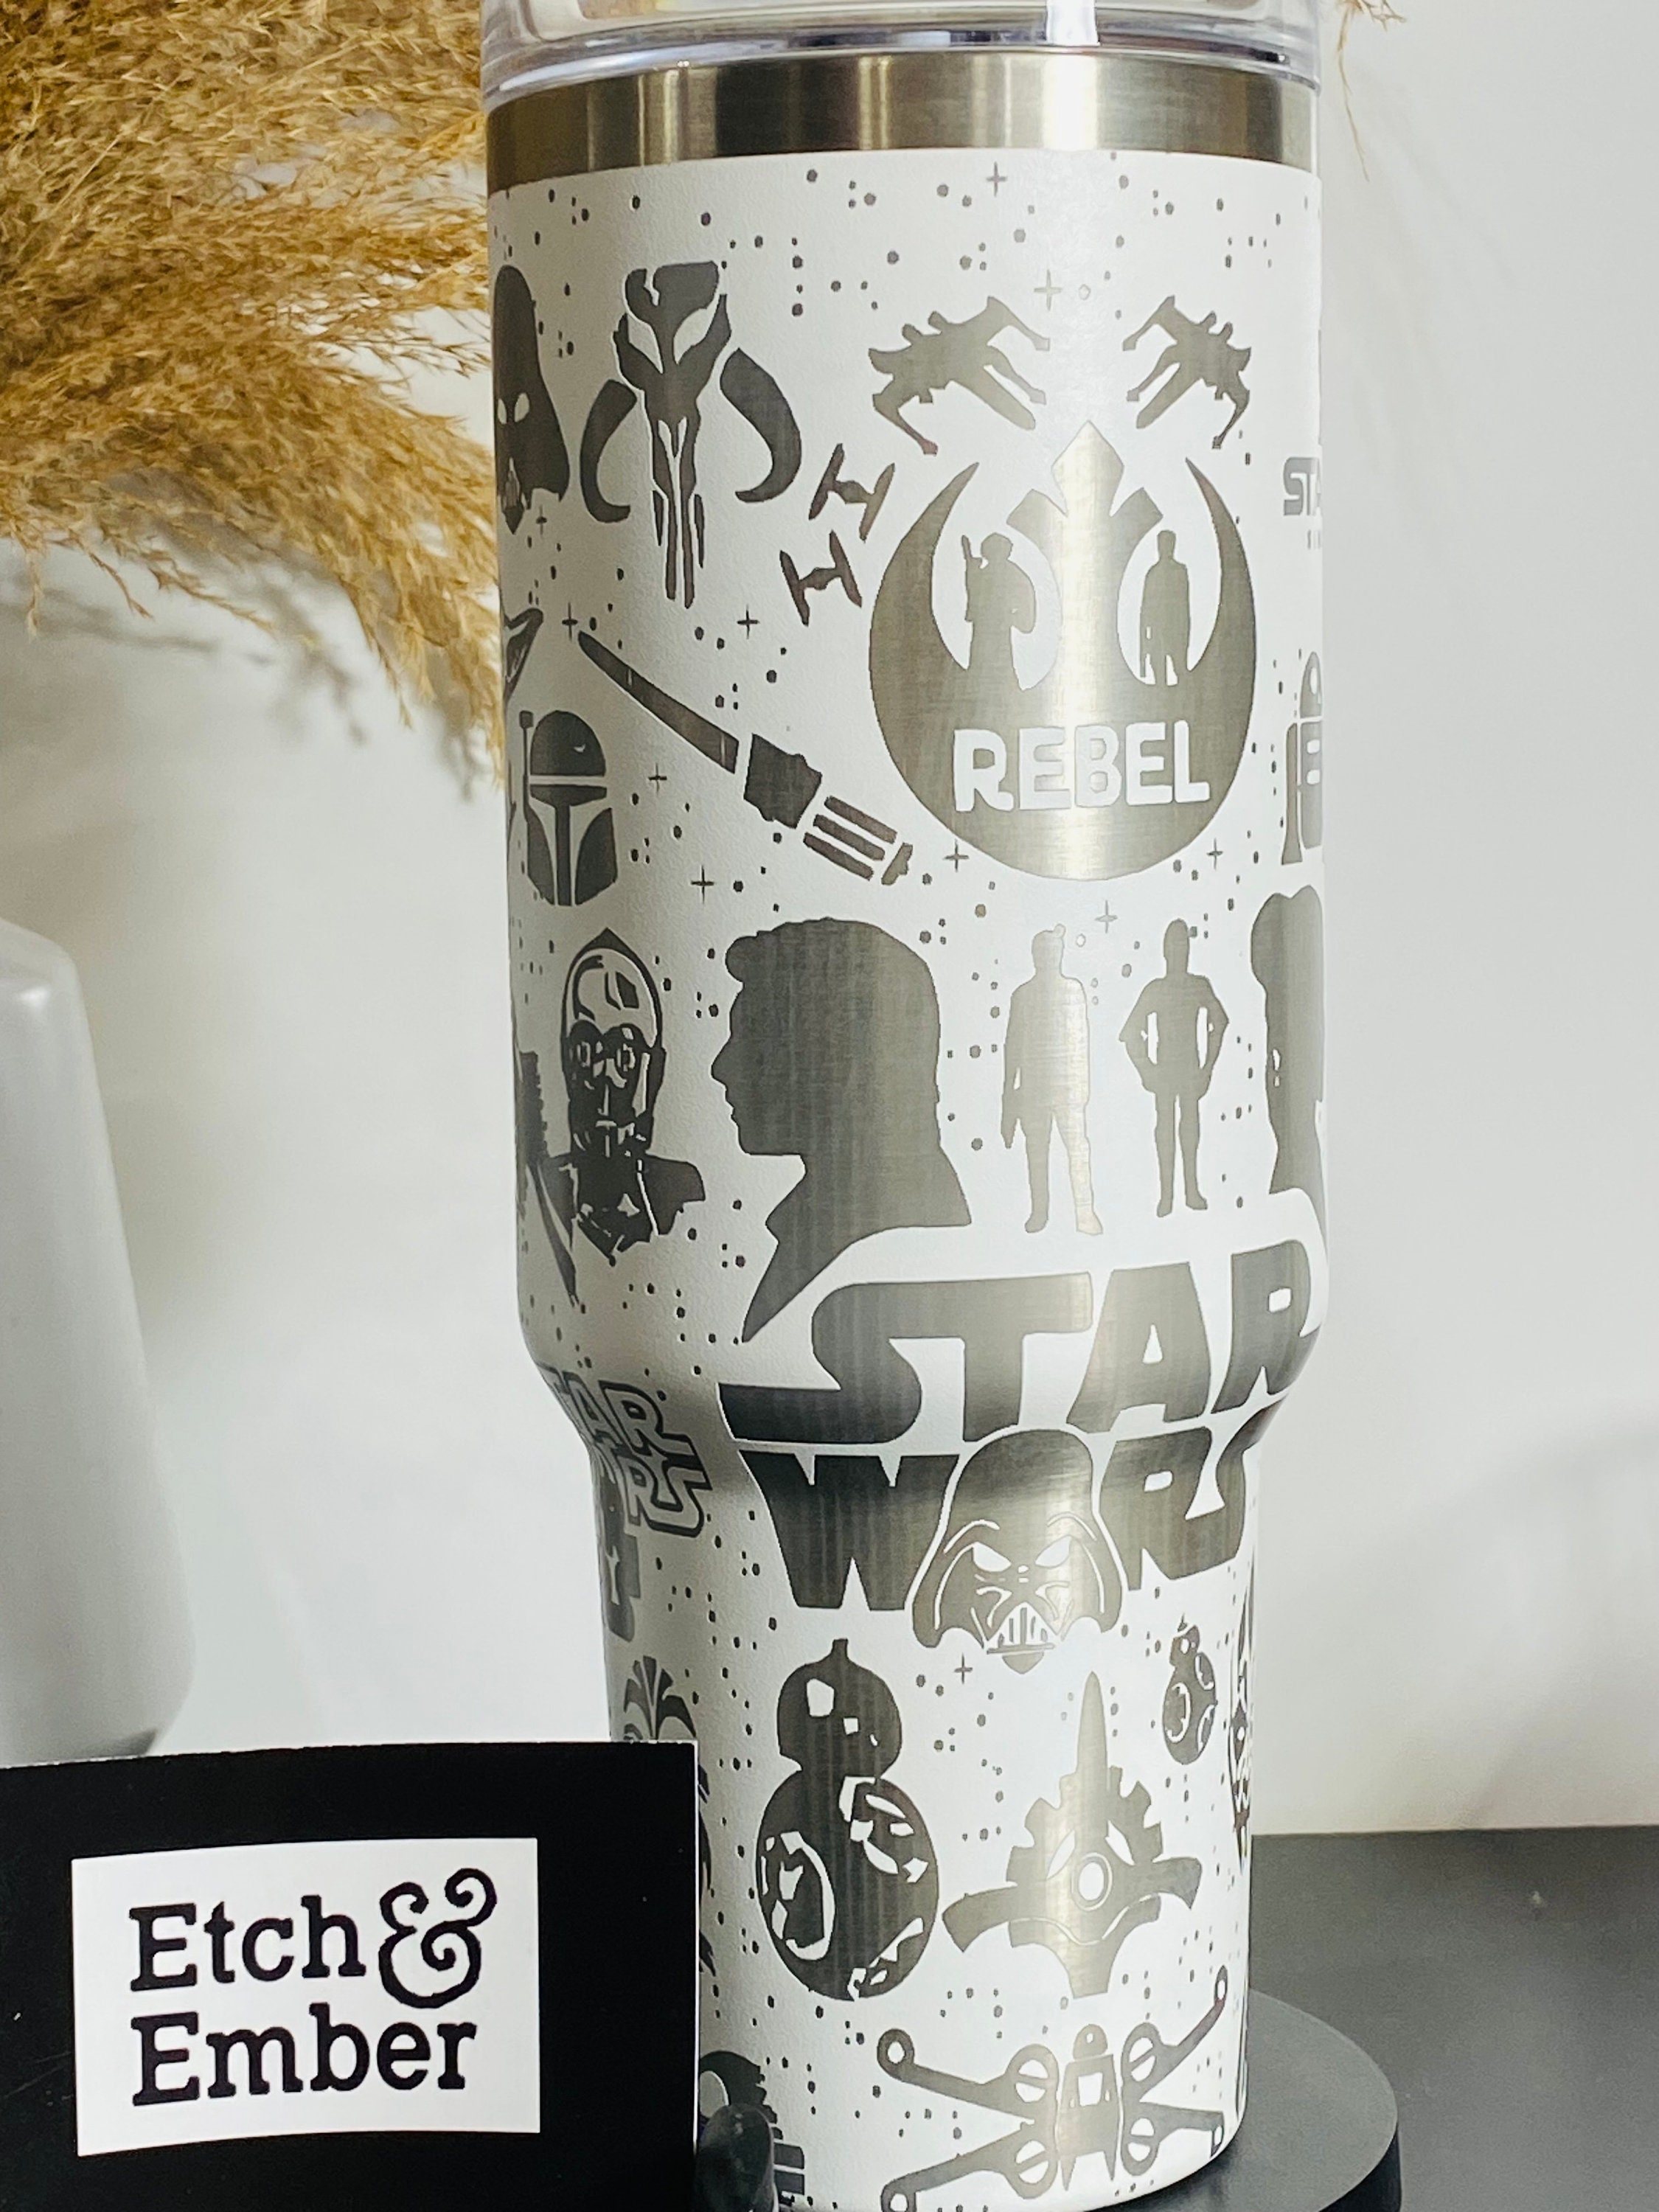 Here it is - the Star Wars cup (and soundtrack) you've been waiting fo, Stanley Tumbler